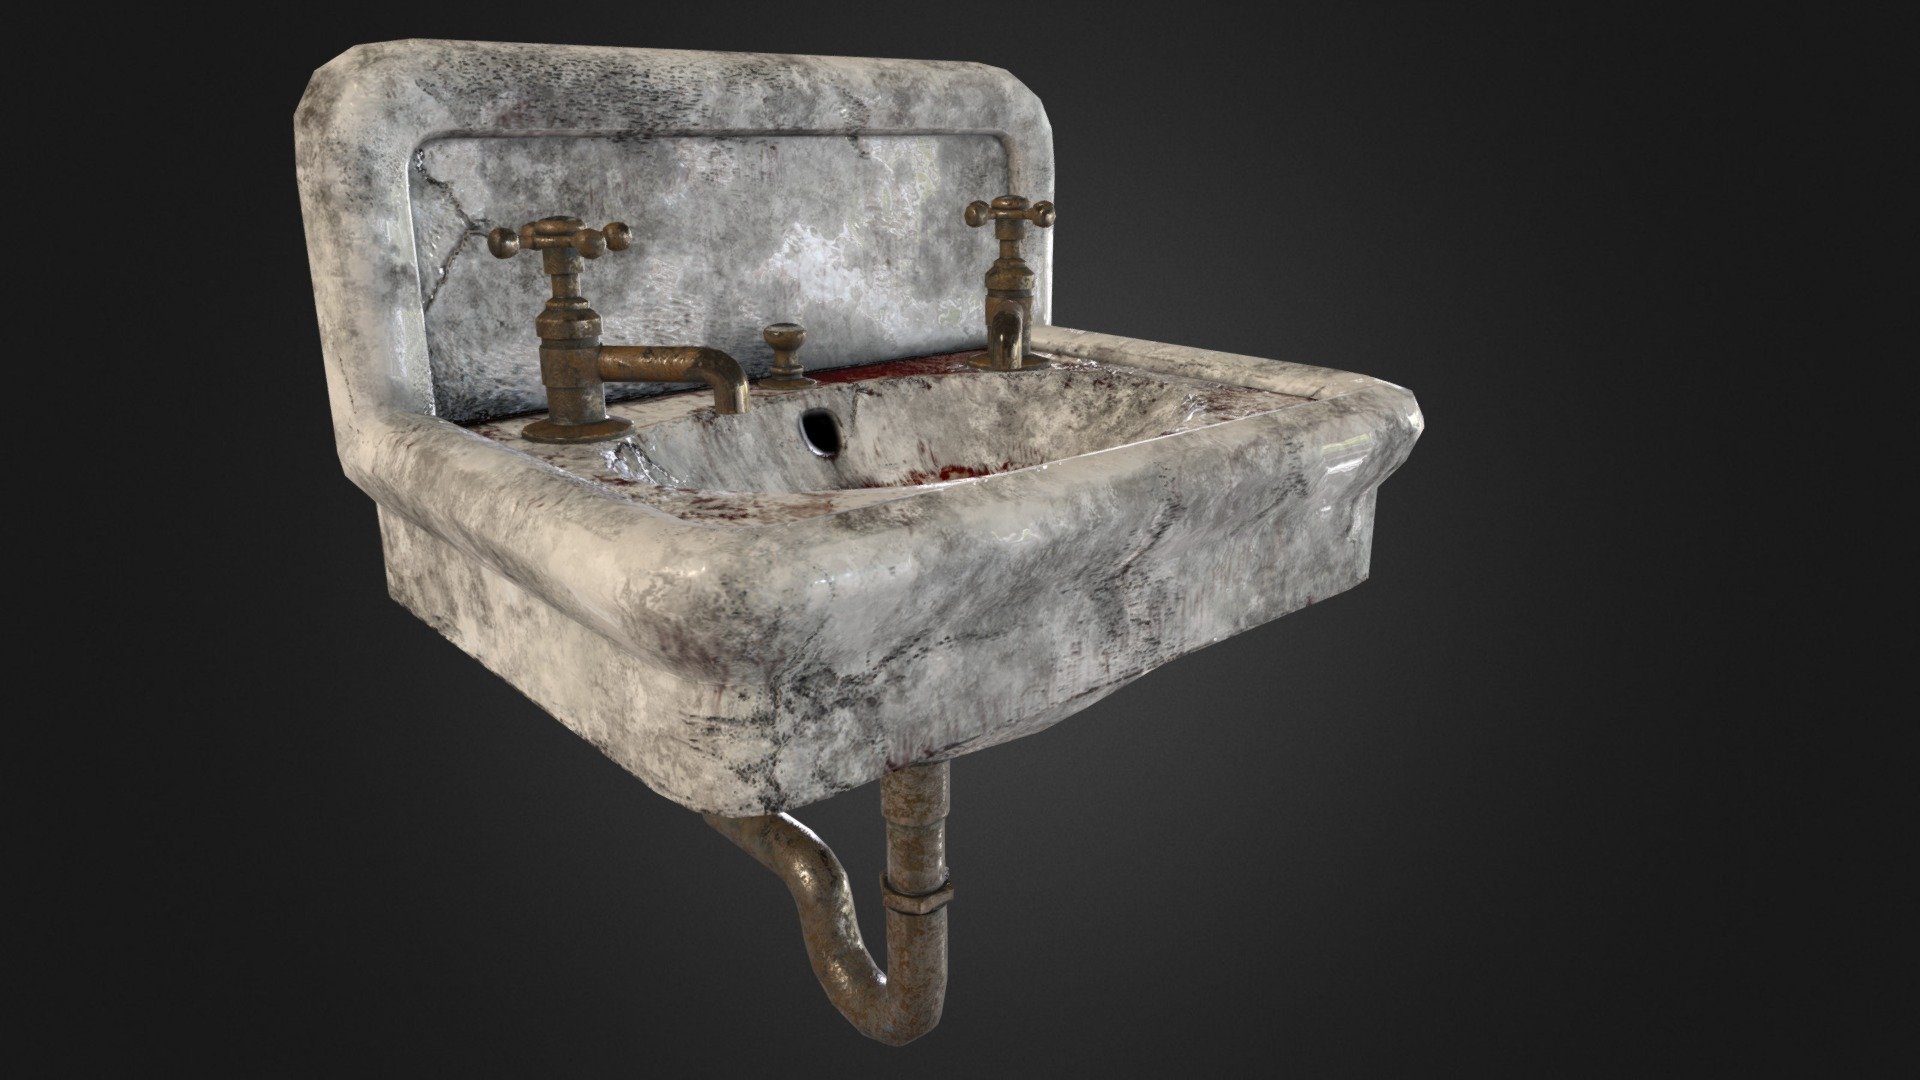 Low Poly Sink
Here's my second props for my upcoming new scene,The Asylum
PBR texture
Done in 3ds max,zbrush,susbtance painter,photoshop 3d model